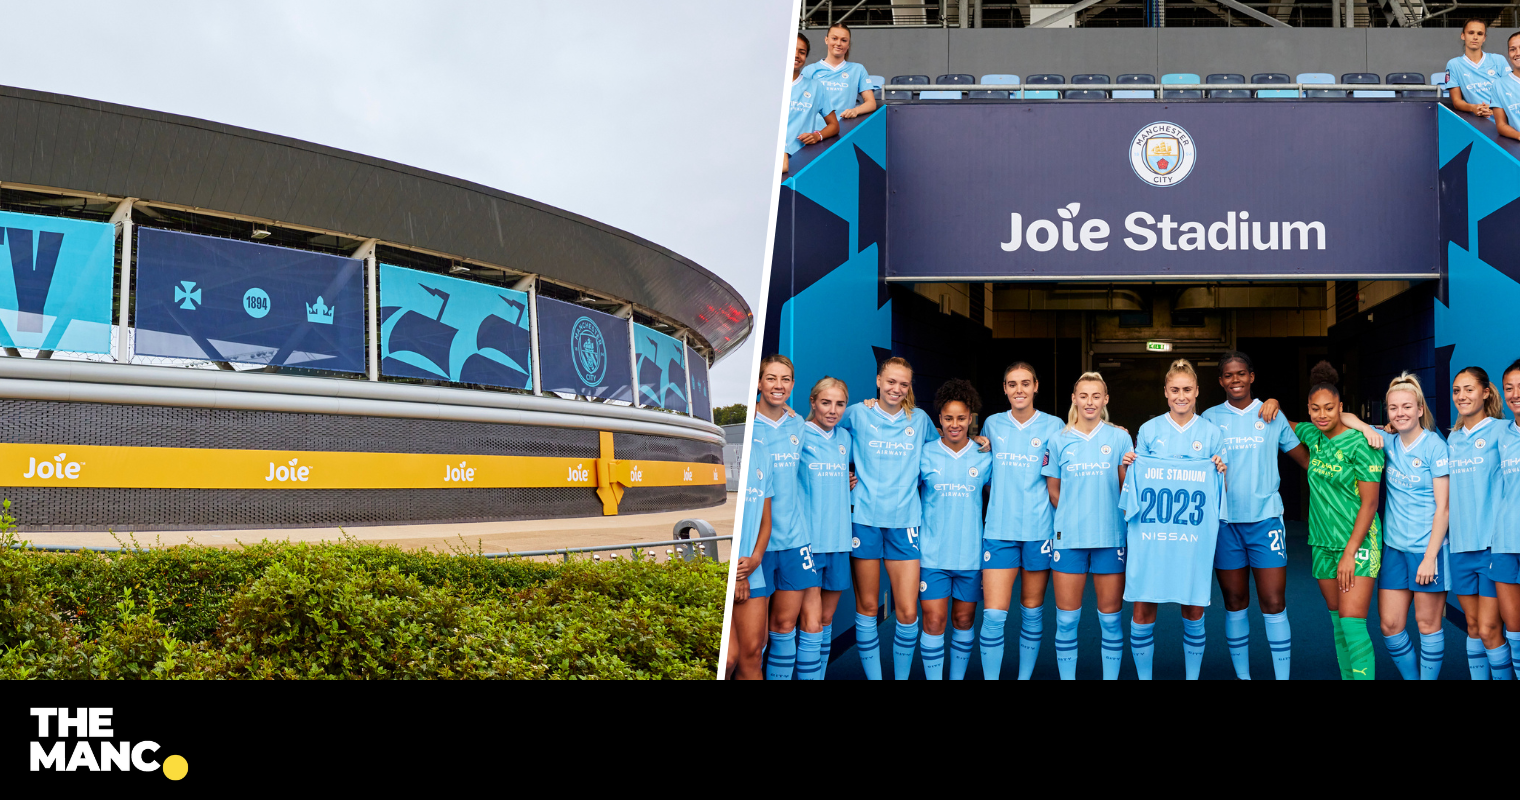 Manchester City Women team naming rights feat - Coliseum